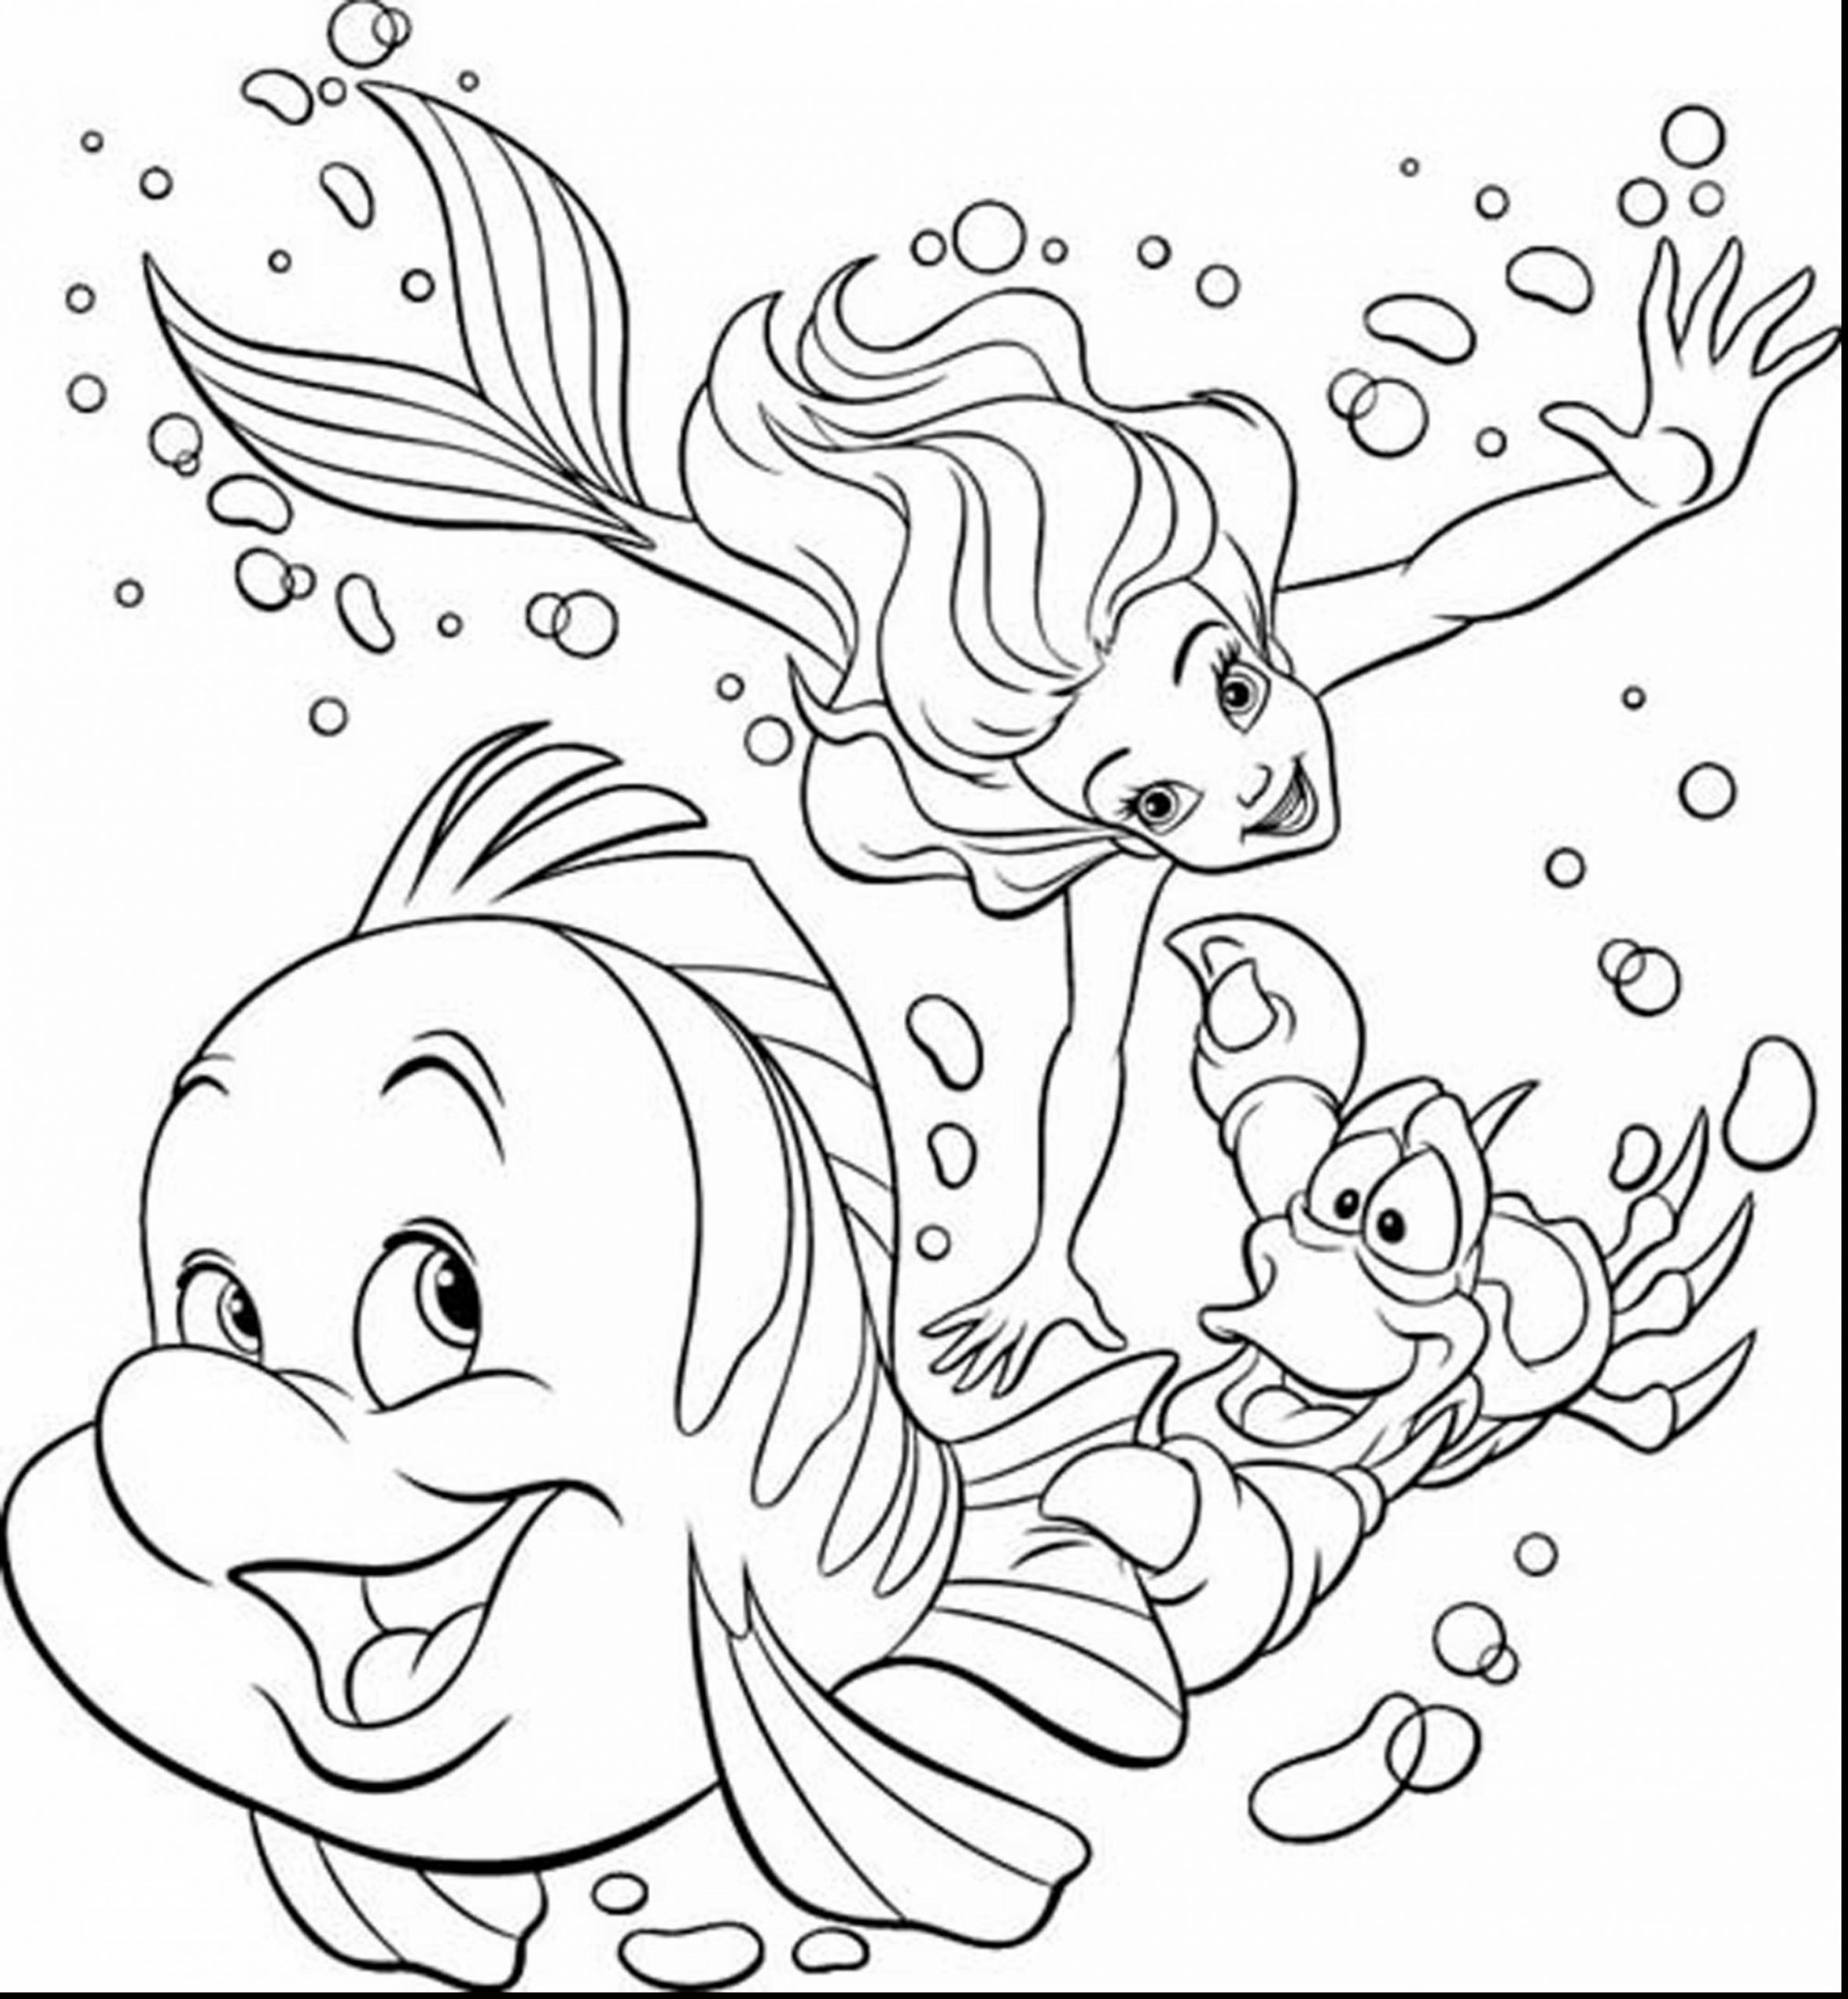 Coloring pages free printable disney princess coloring pages sheet for kids scaled